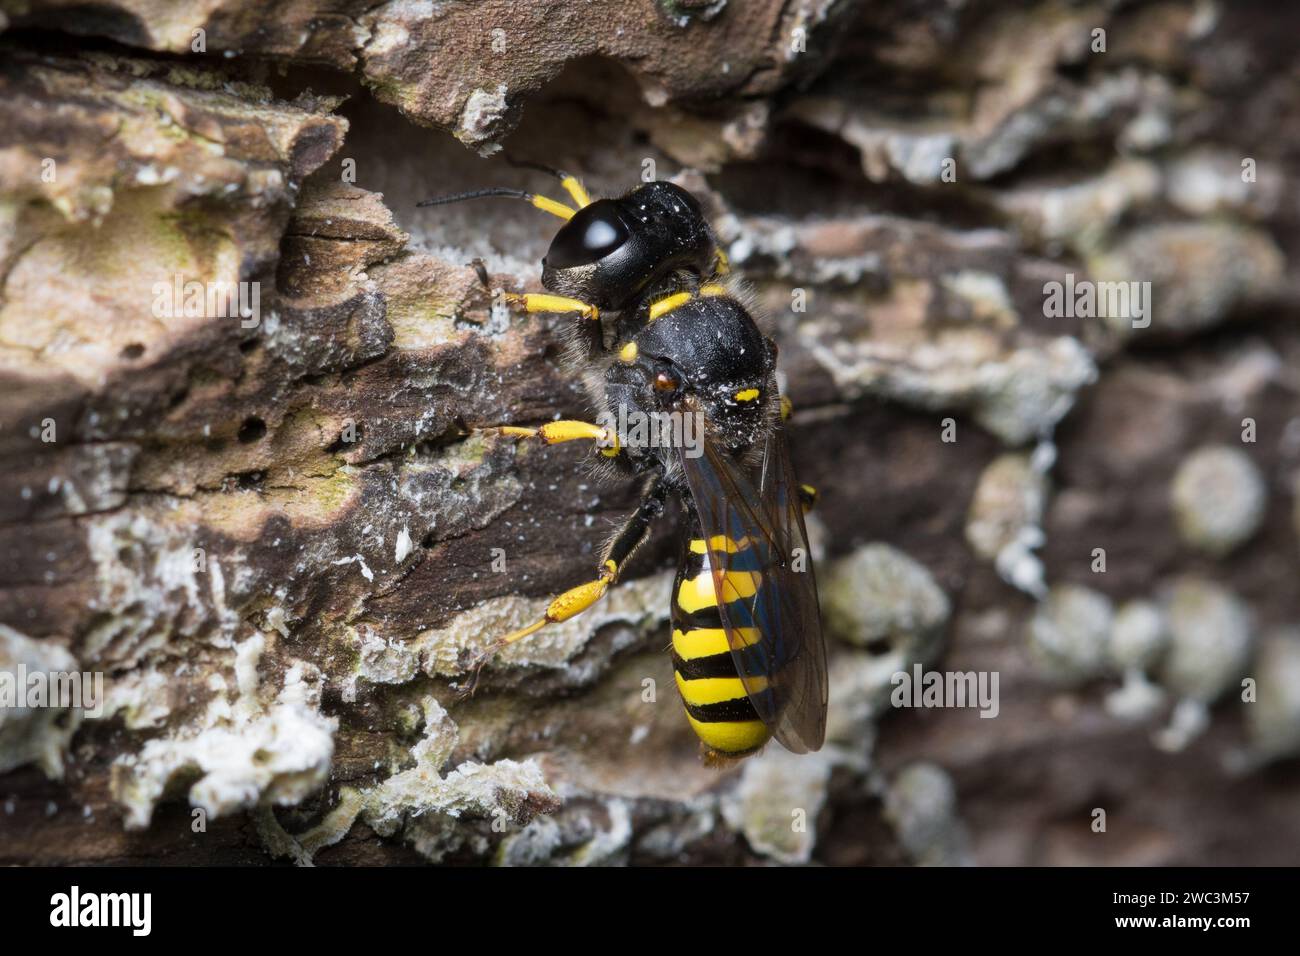 A female solitary wasp (Ectemnius sp) returning to her nest in a rotting log. Photographed in Sunderland, North East England. Stock Photo